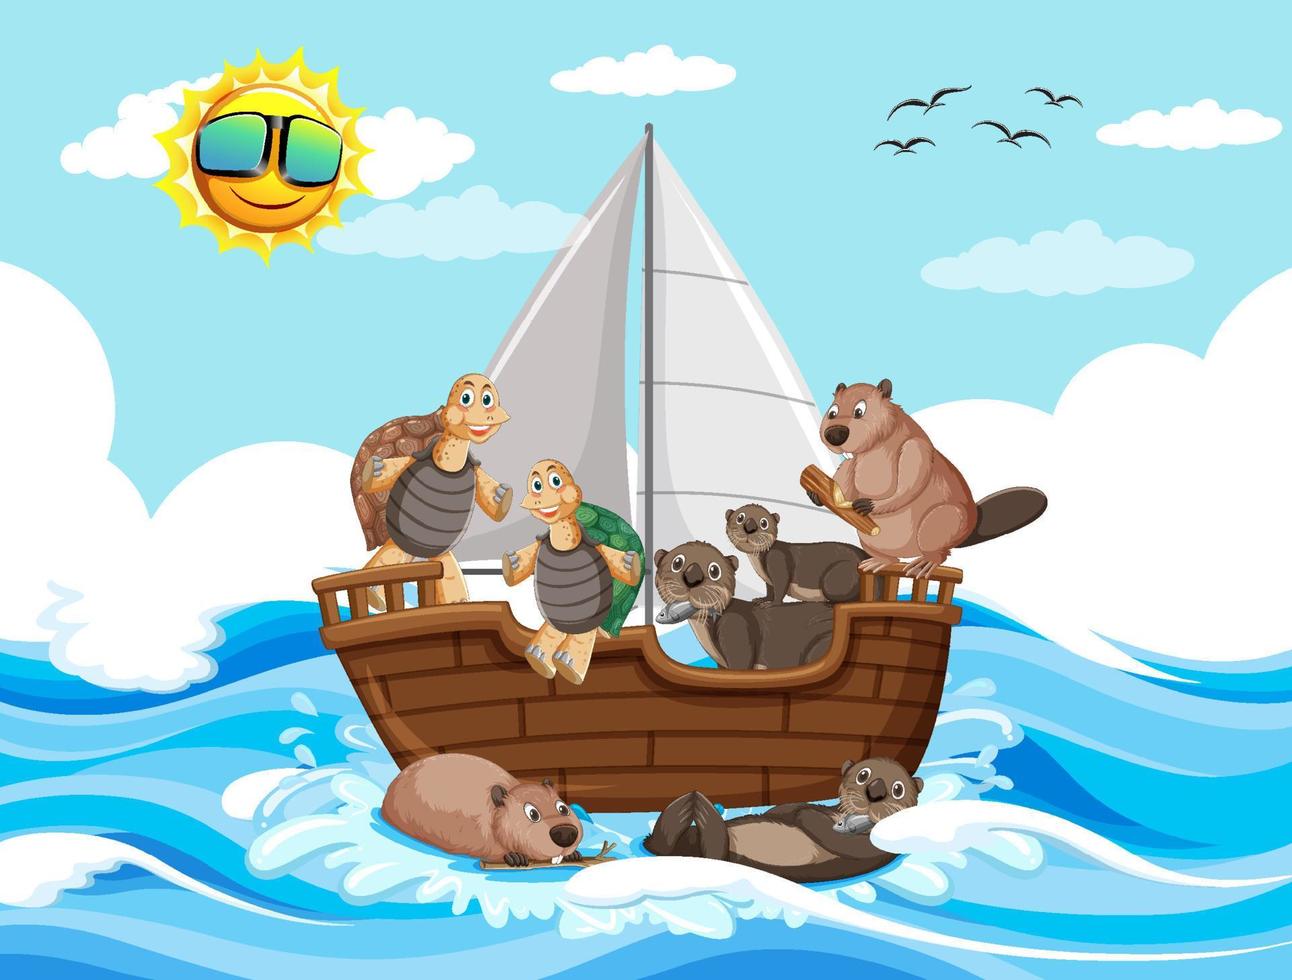 Ocean scene with wild animals on a sailboat vector